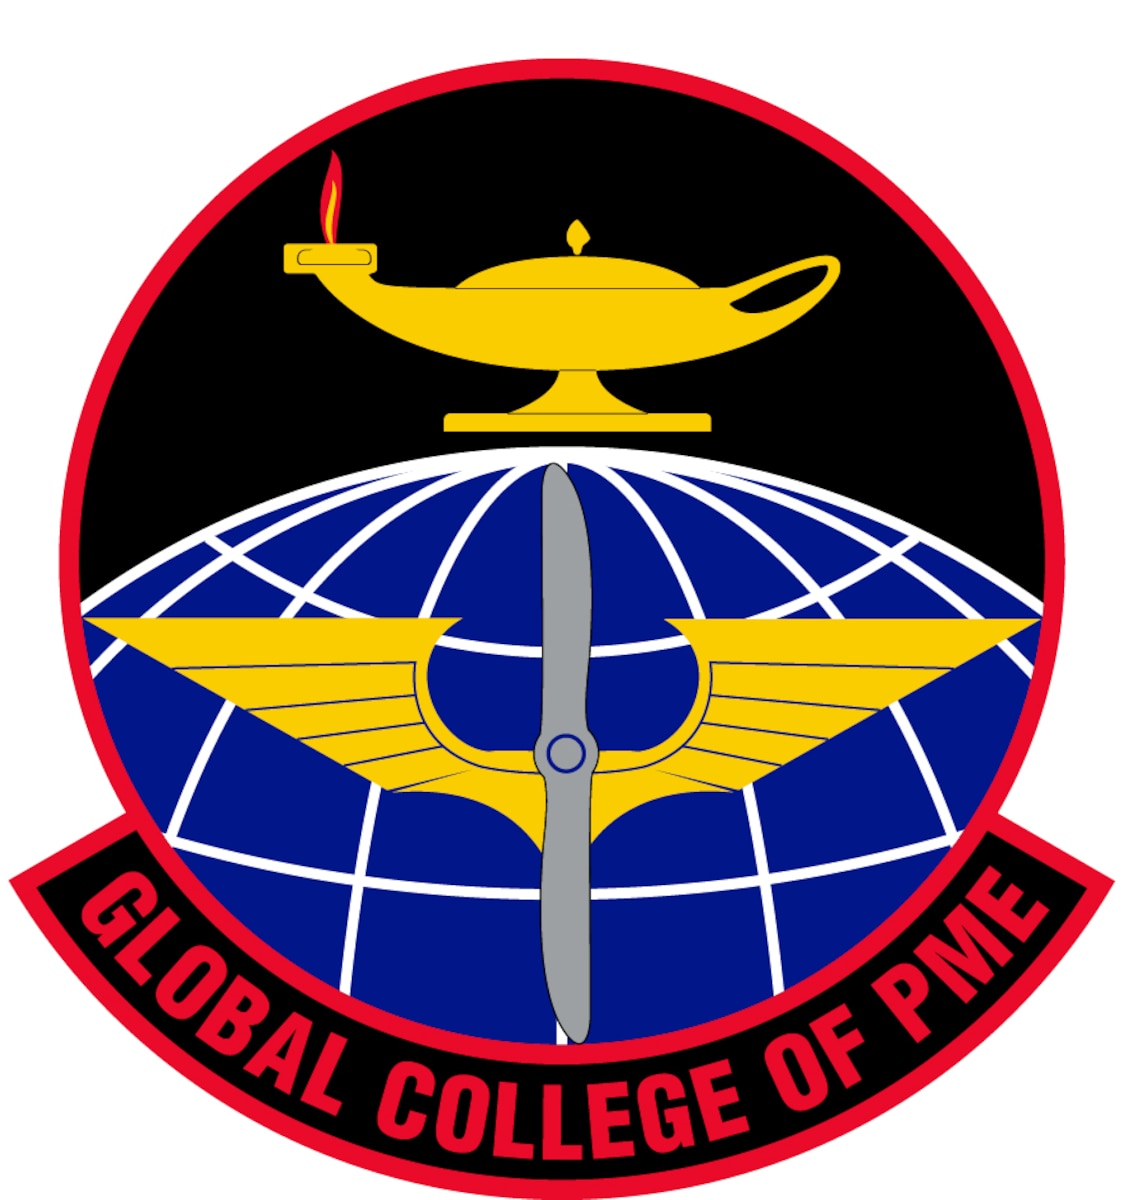 Enrollments for new officer professional military education distance learning students will be back on-line on Sept. 6, 2022.    The distance learning programs for Squadron Officer School, Air Command and Staff College and Air War College have been closed for enrollments and graduations since July 7, 2022, in support of the Air University-wide transition to the new Learner Environment Design-Student Information System.